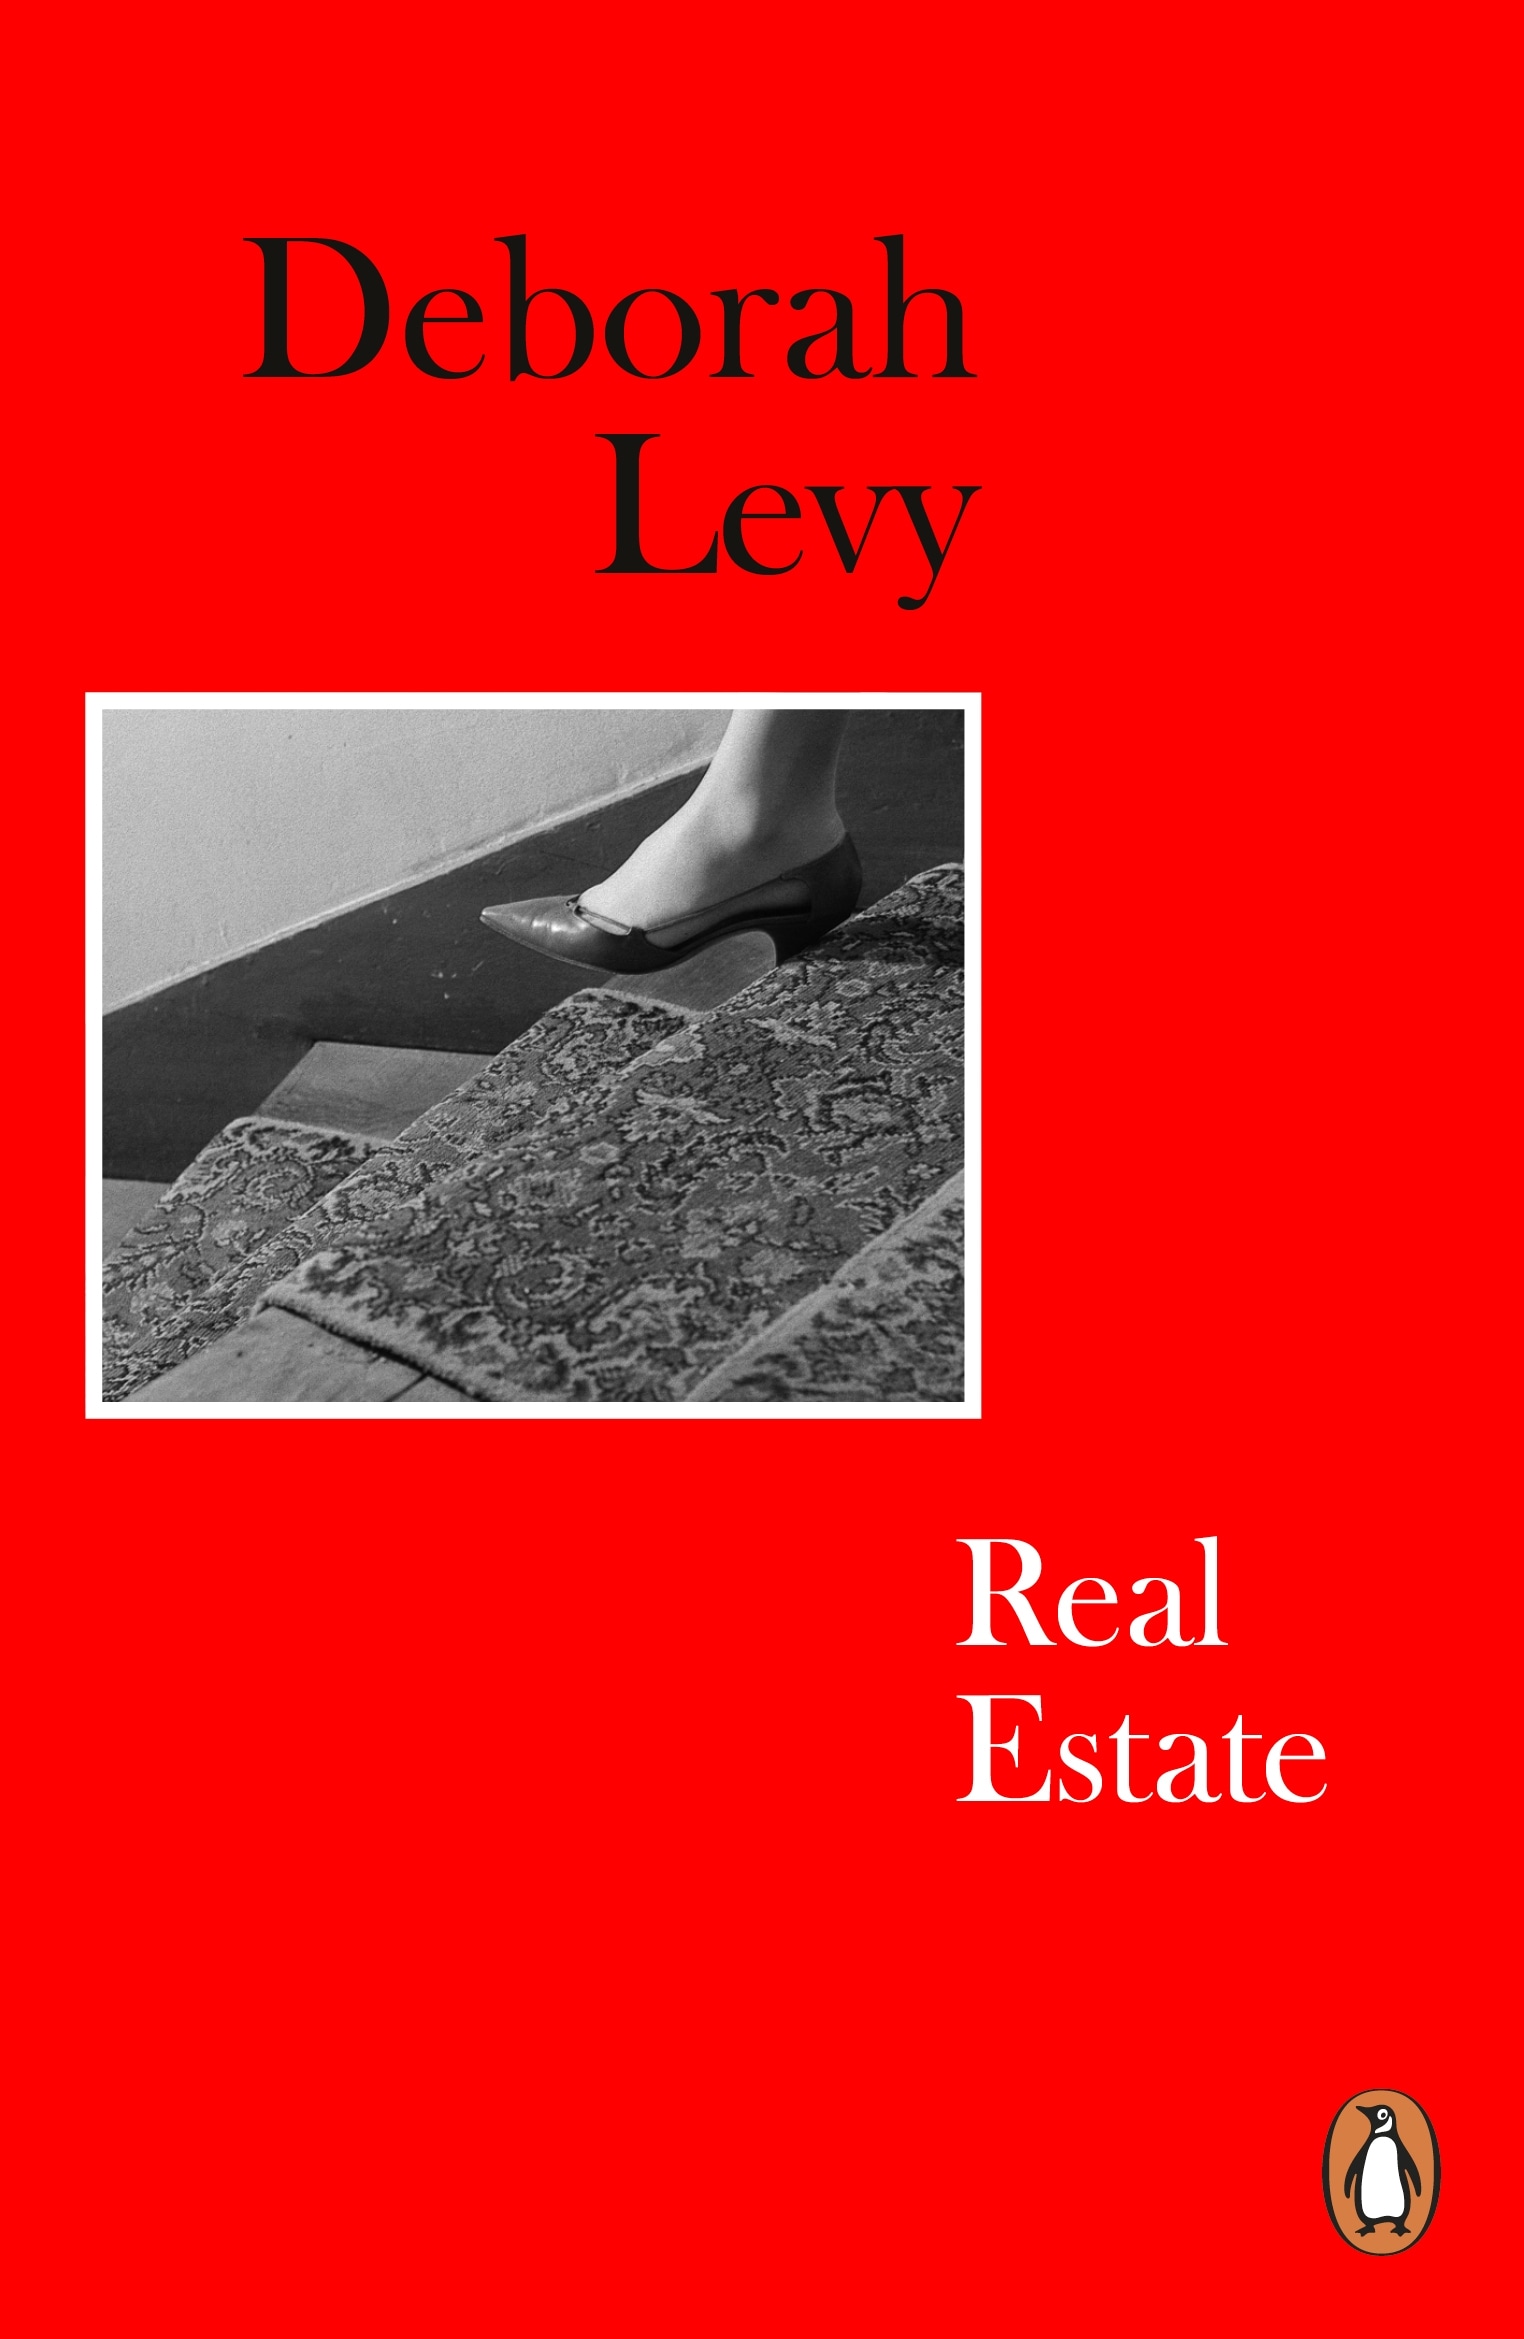 Book “Real Estate” by Deborah Levy — February 3, 2022